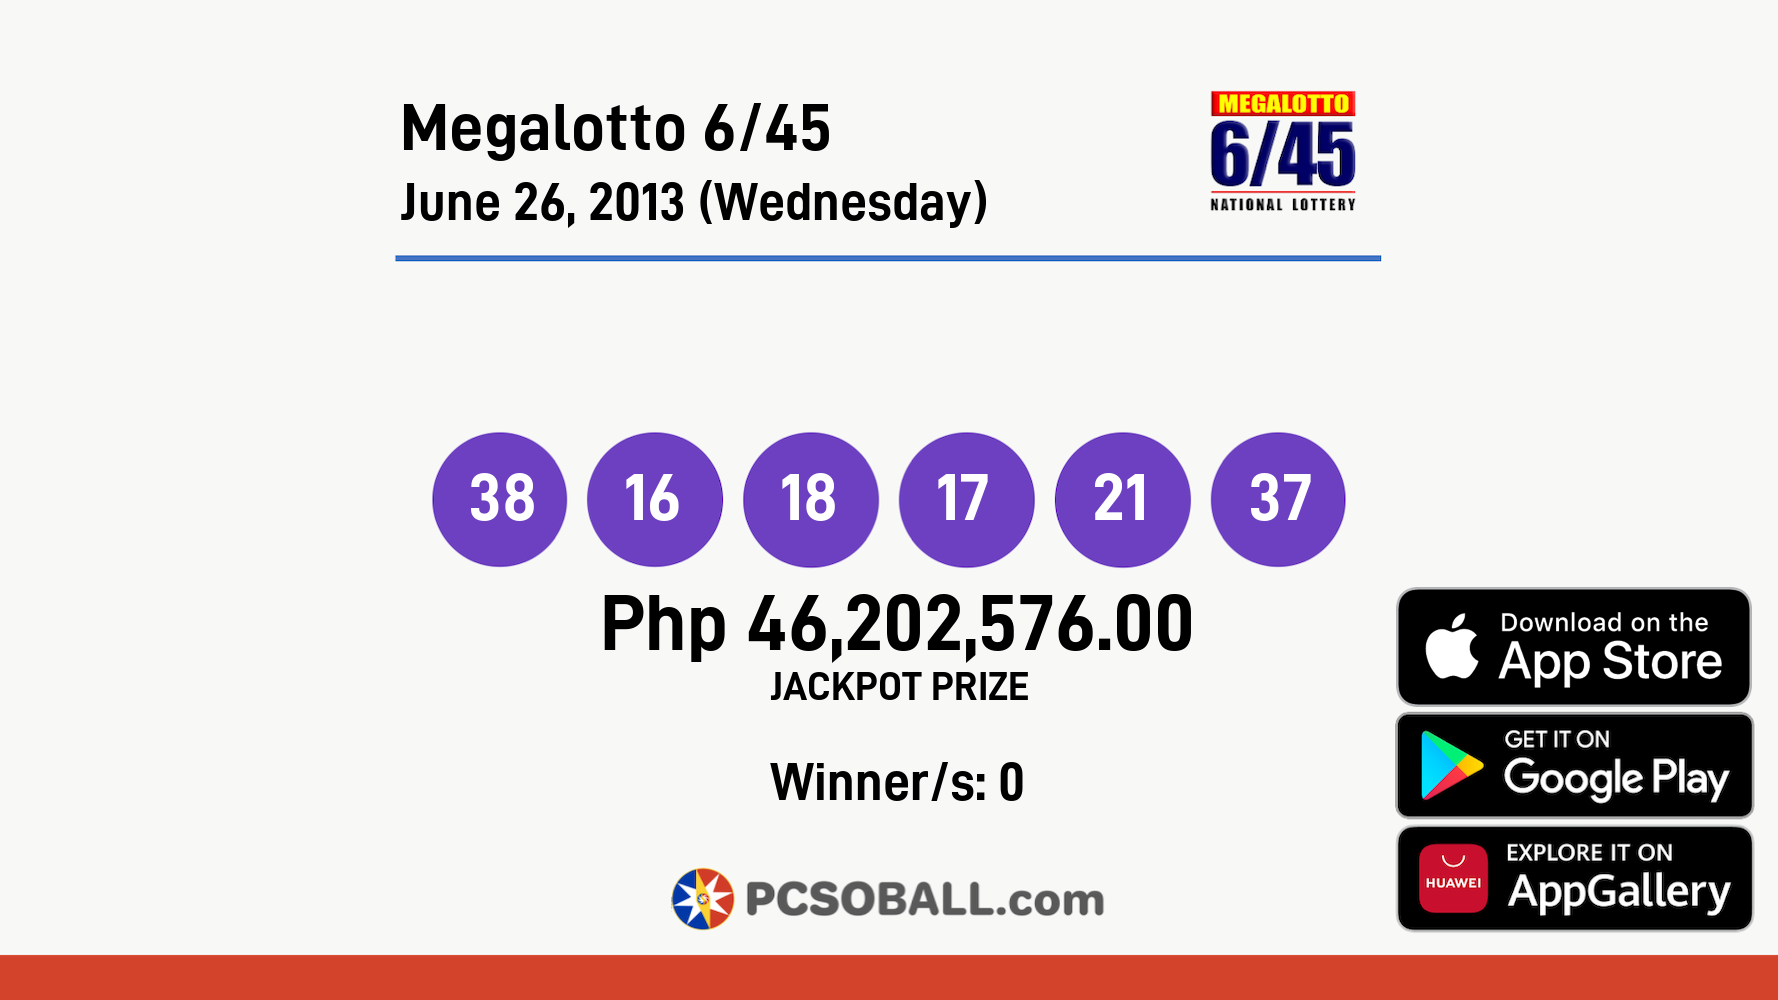 Megalotto 6/45 June 26, 2013 (Wednesday) Result